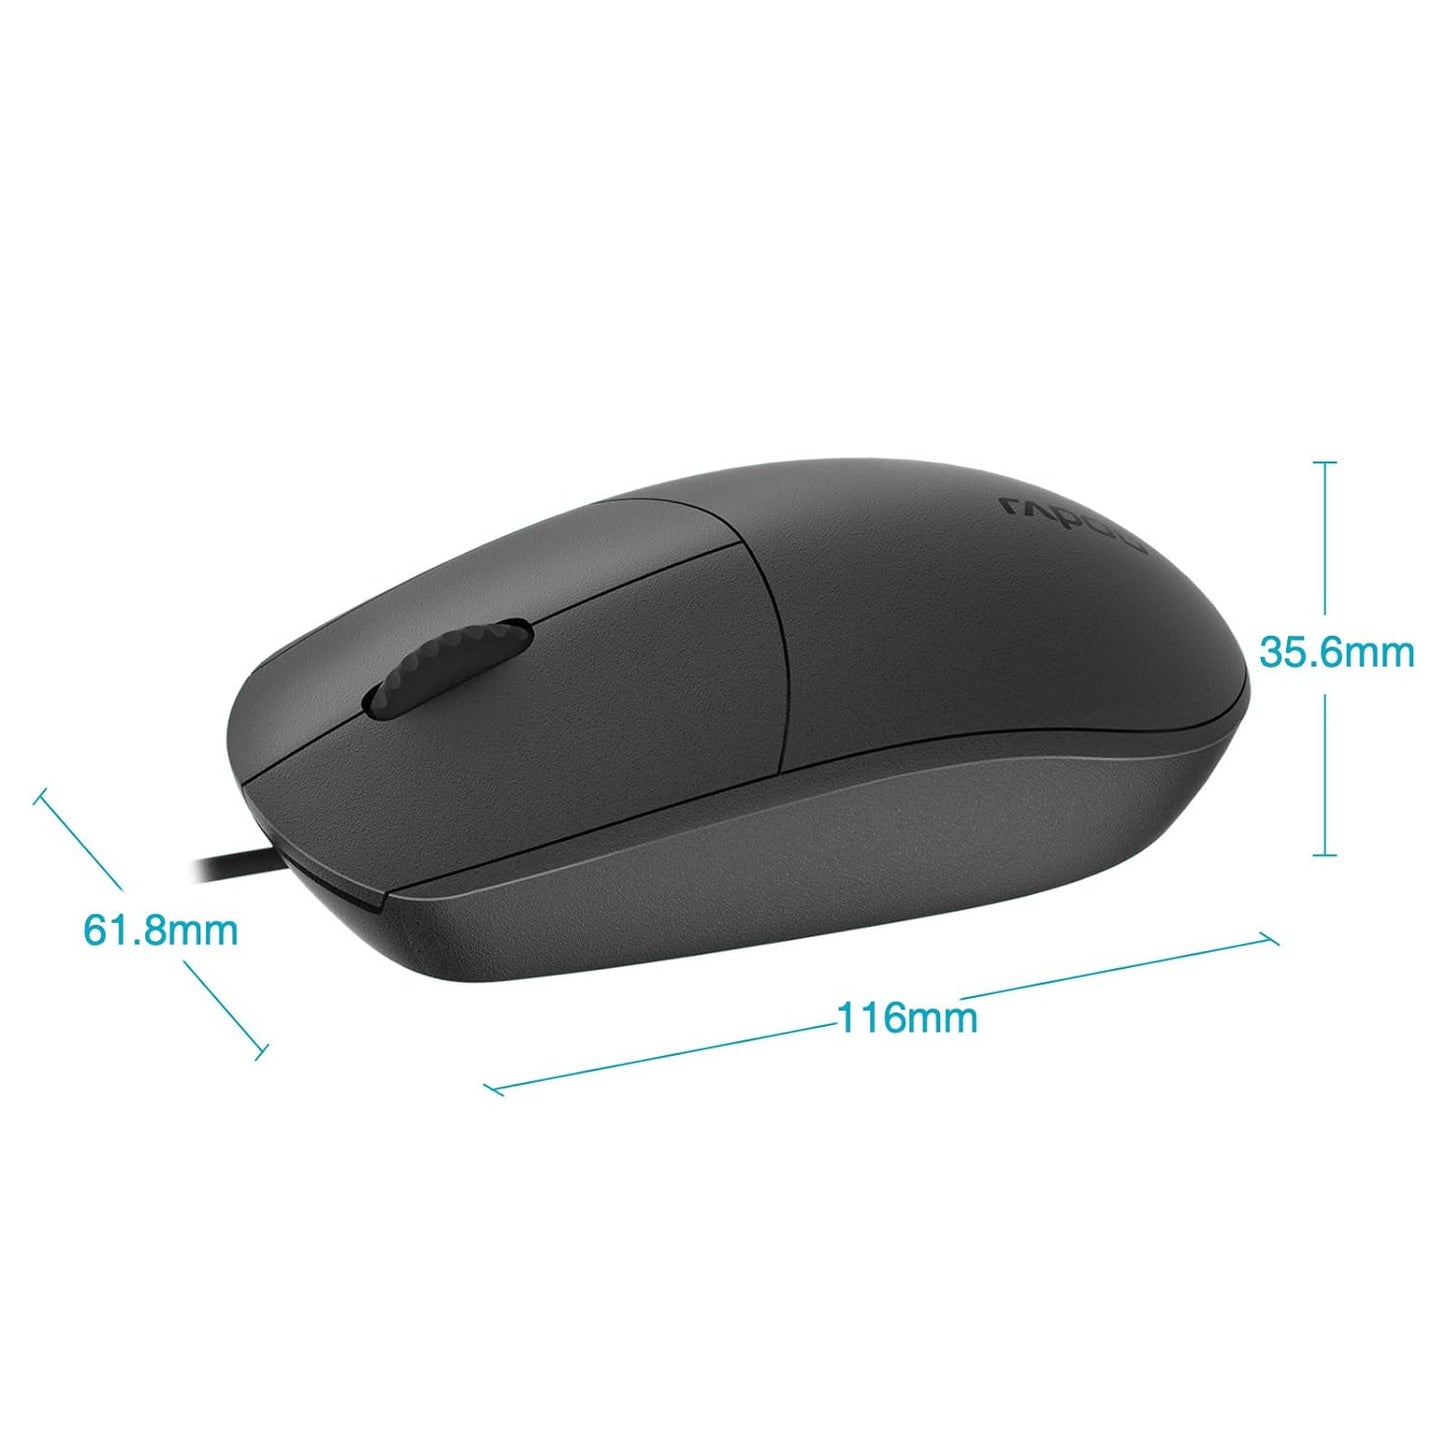 Rapoo N100 Wired  USB Mouse